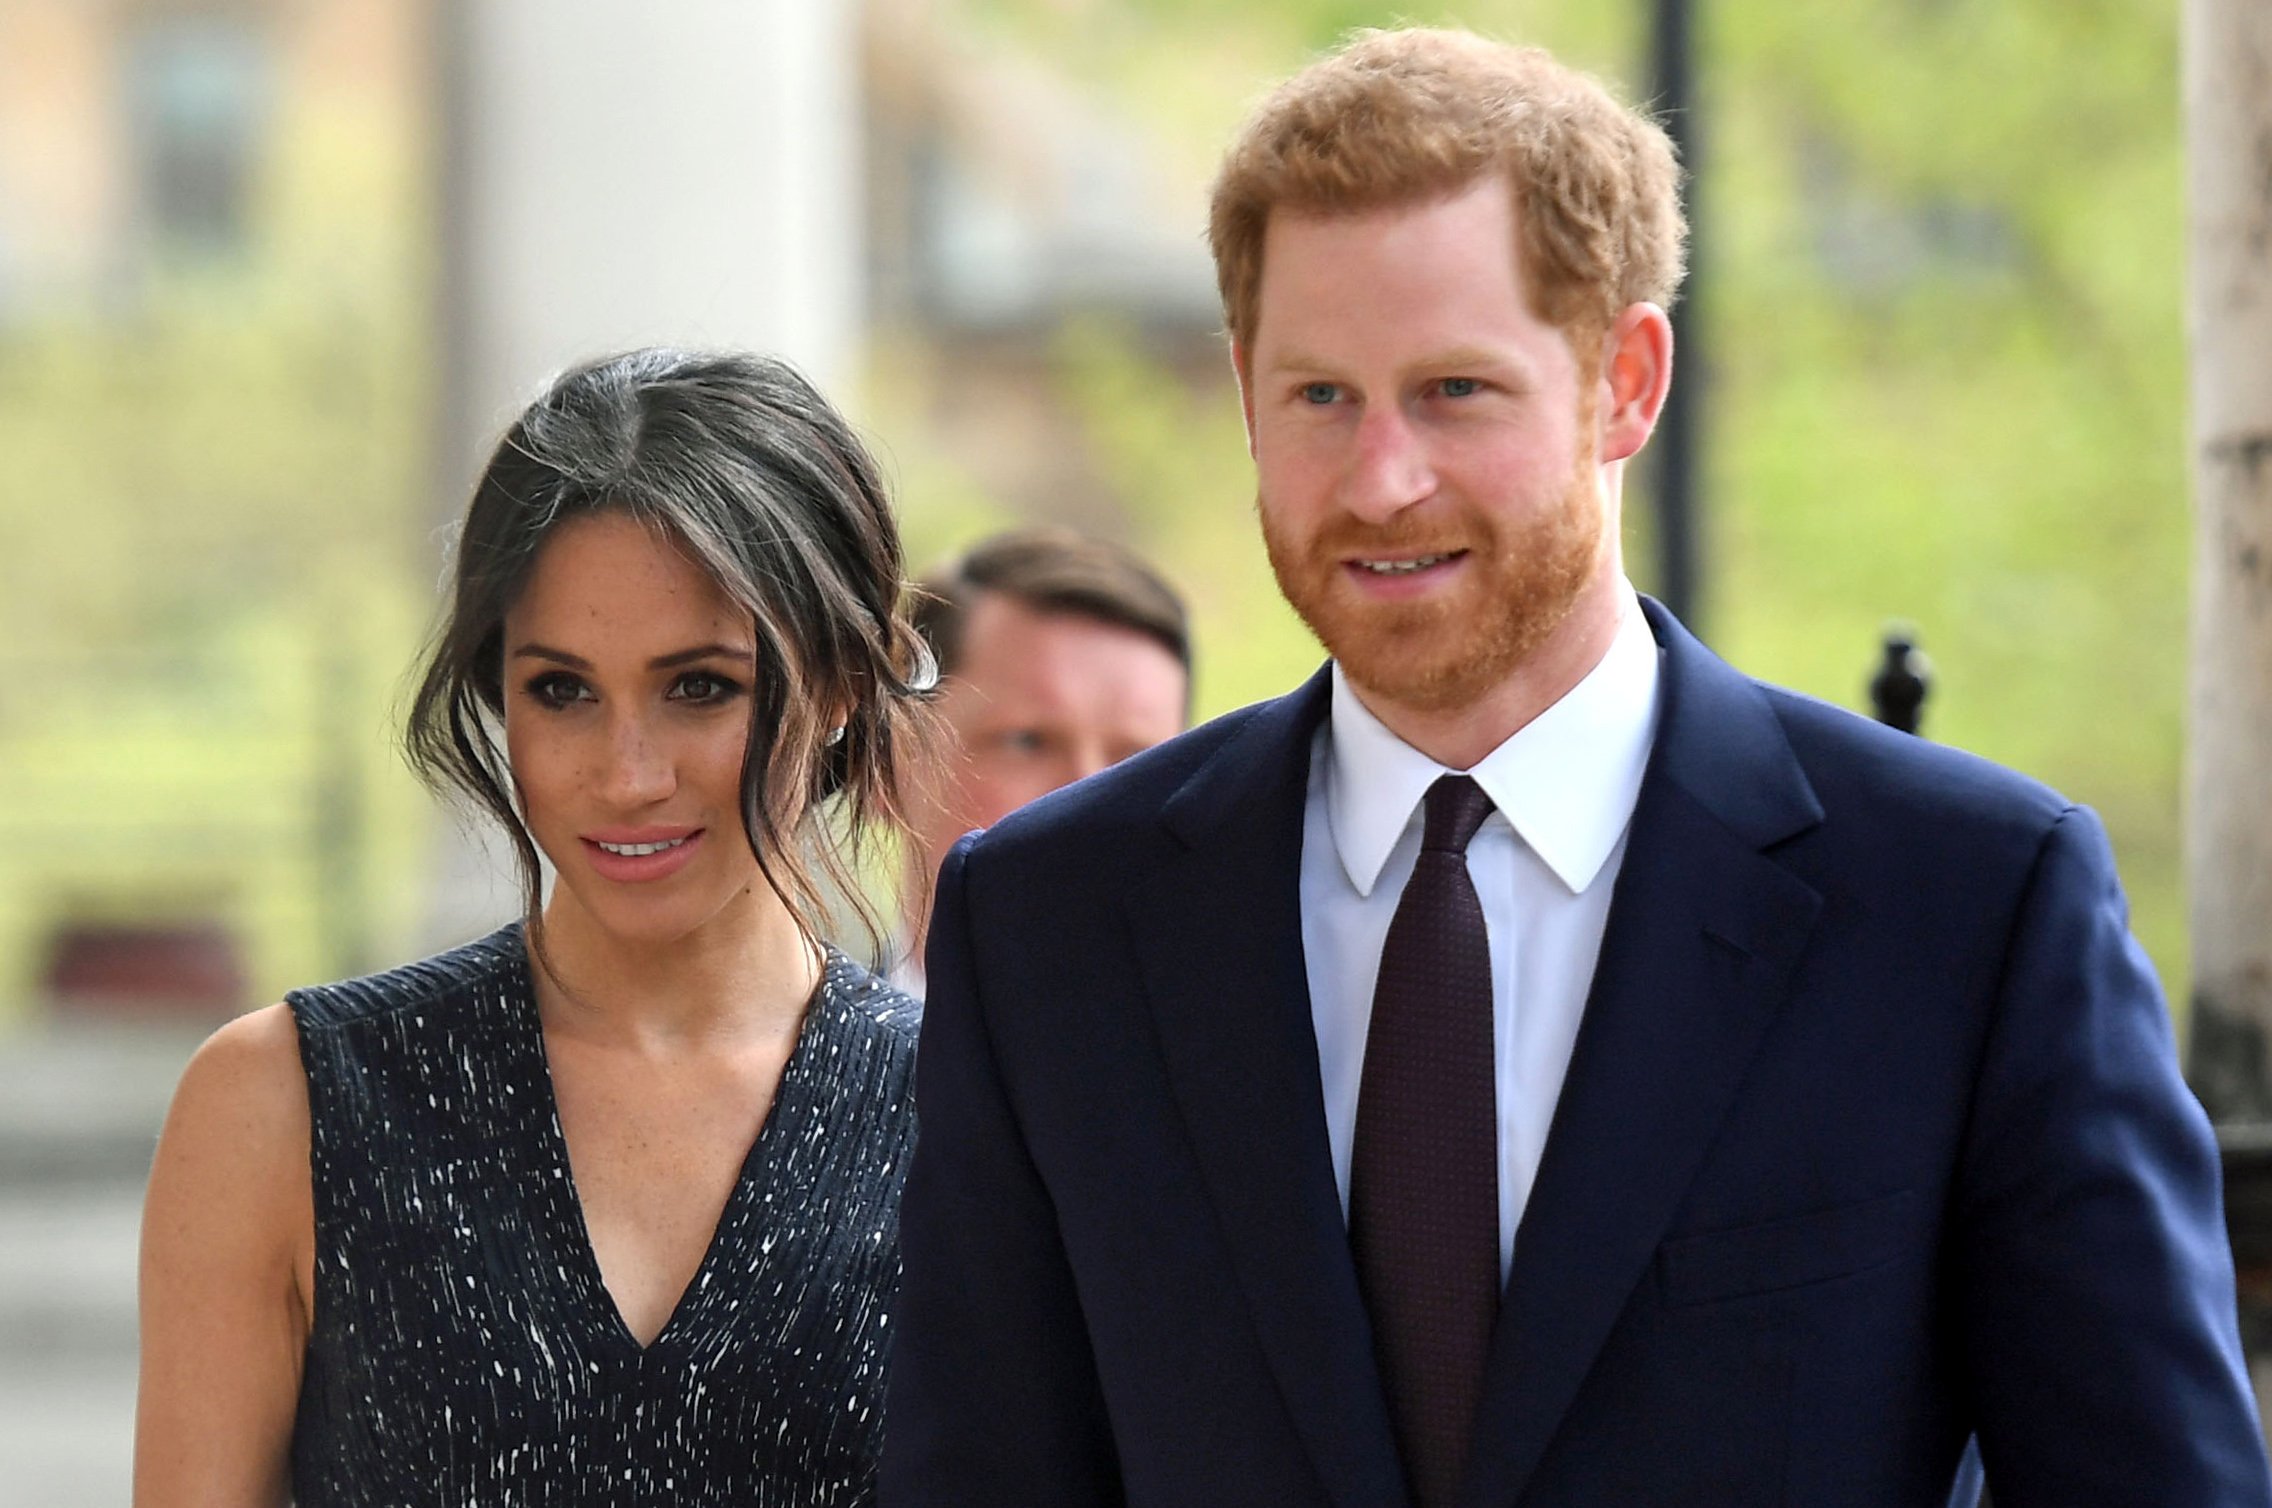 Why No One Seemed to Speak to Meghan Markle and Prince Harry at Queen Elizabeth II’s Funeral According to Expert